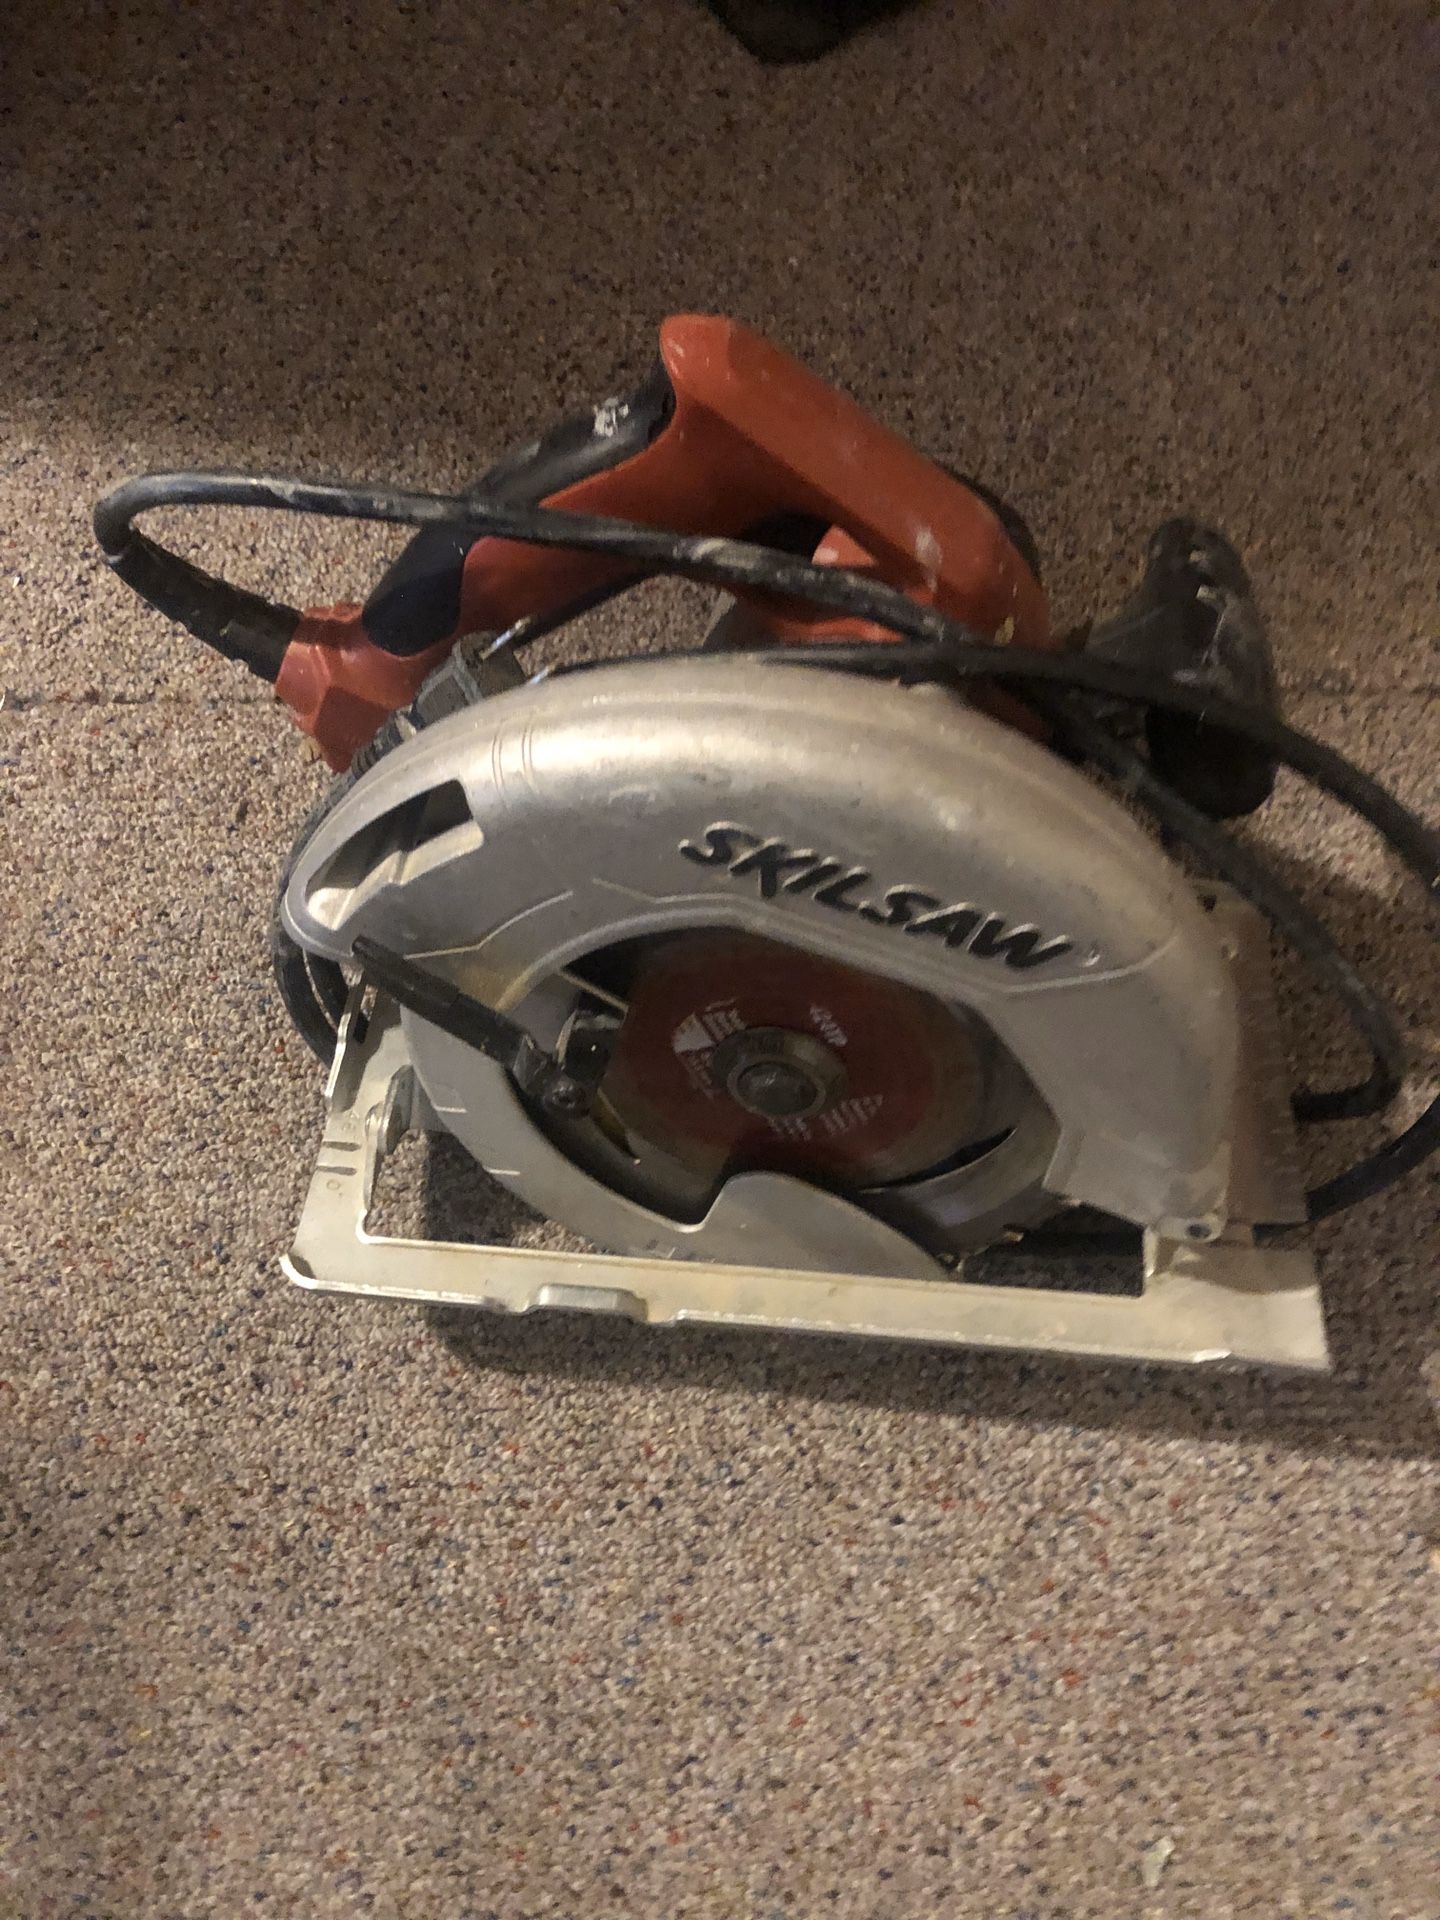 Saw, in good condition skilsaw blade is fine and sharp